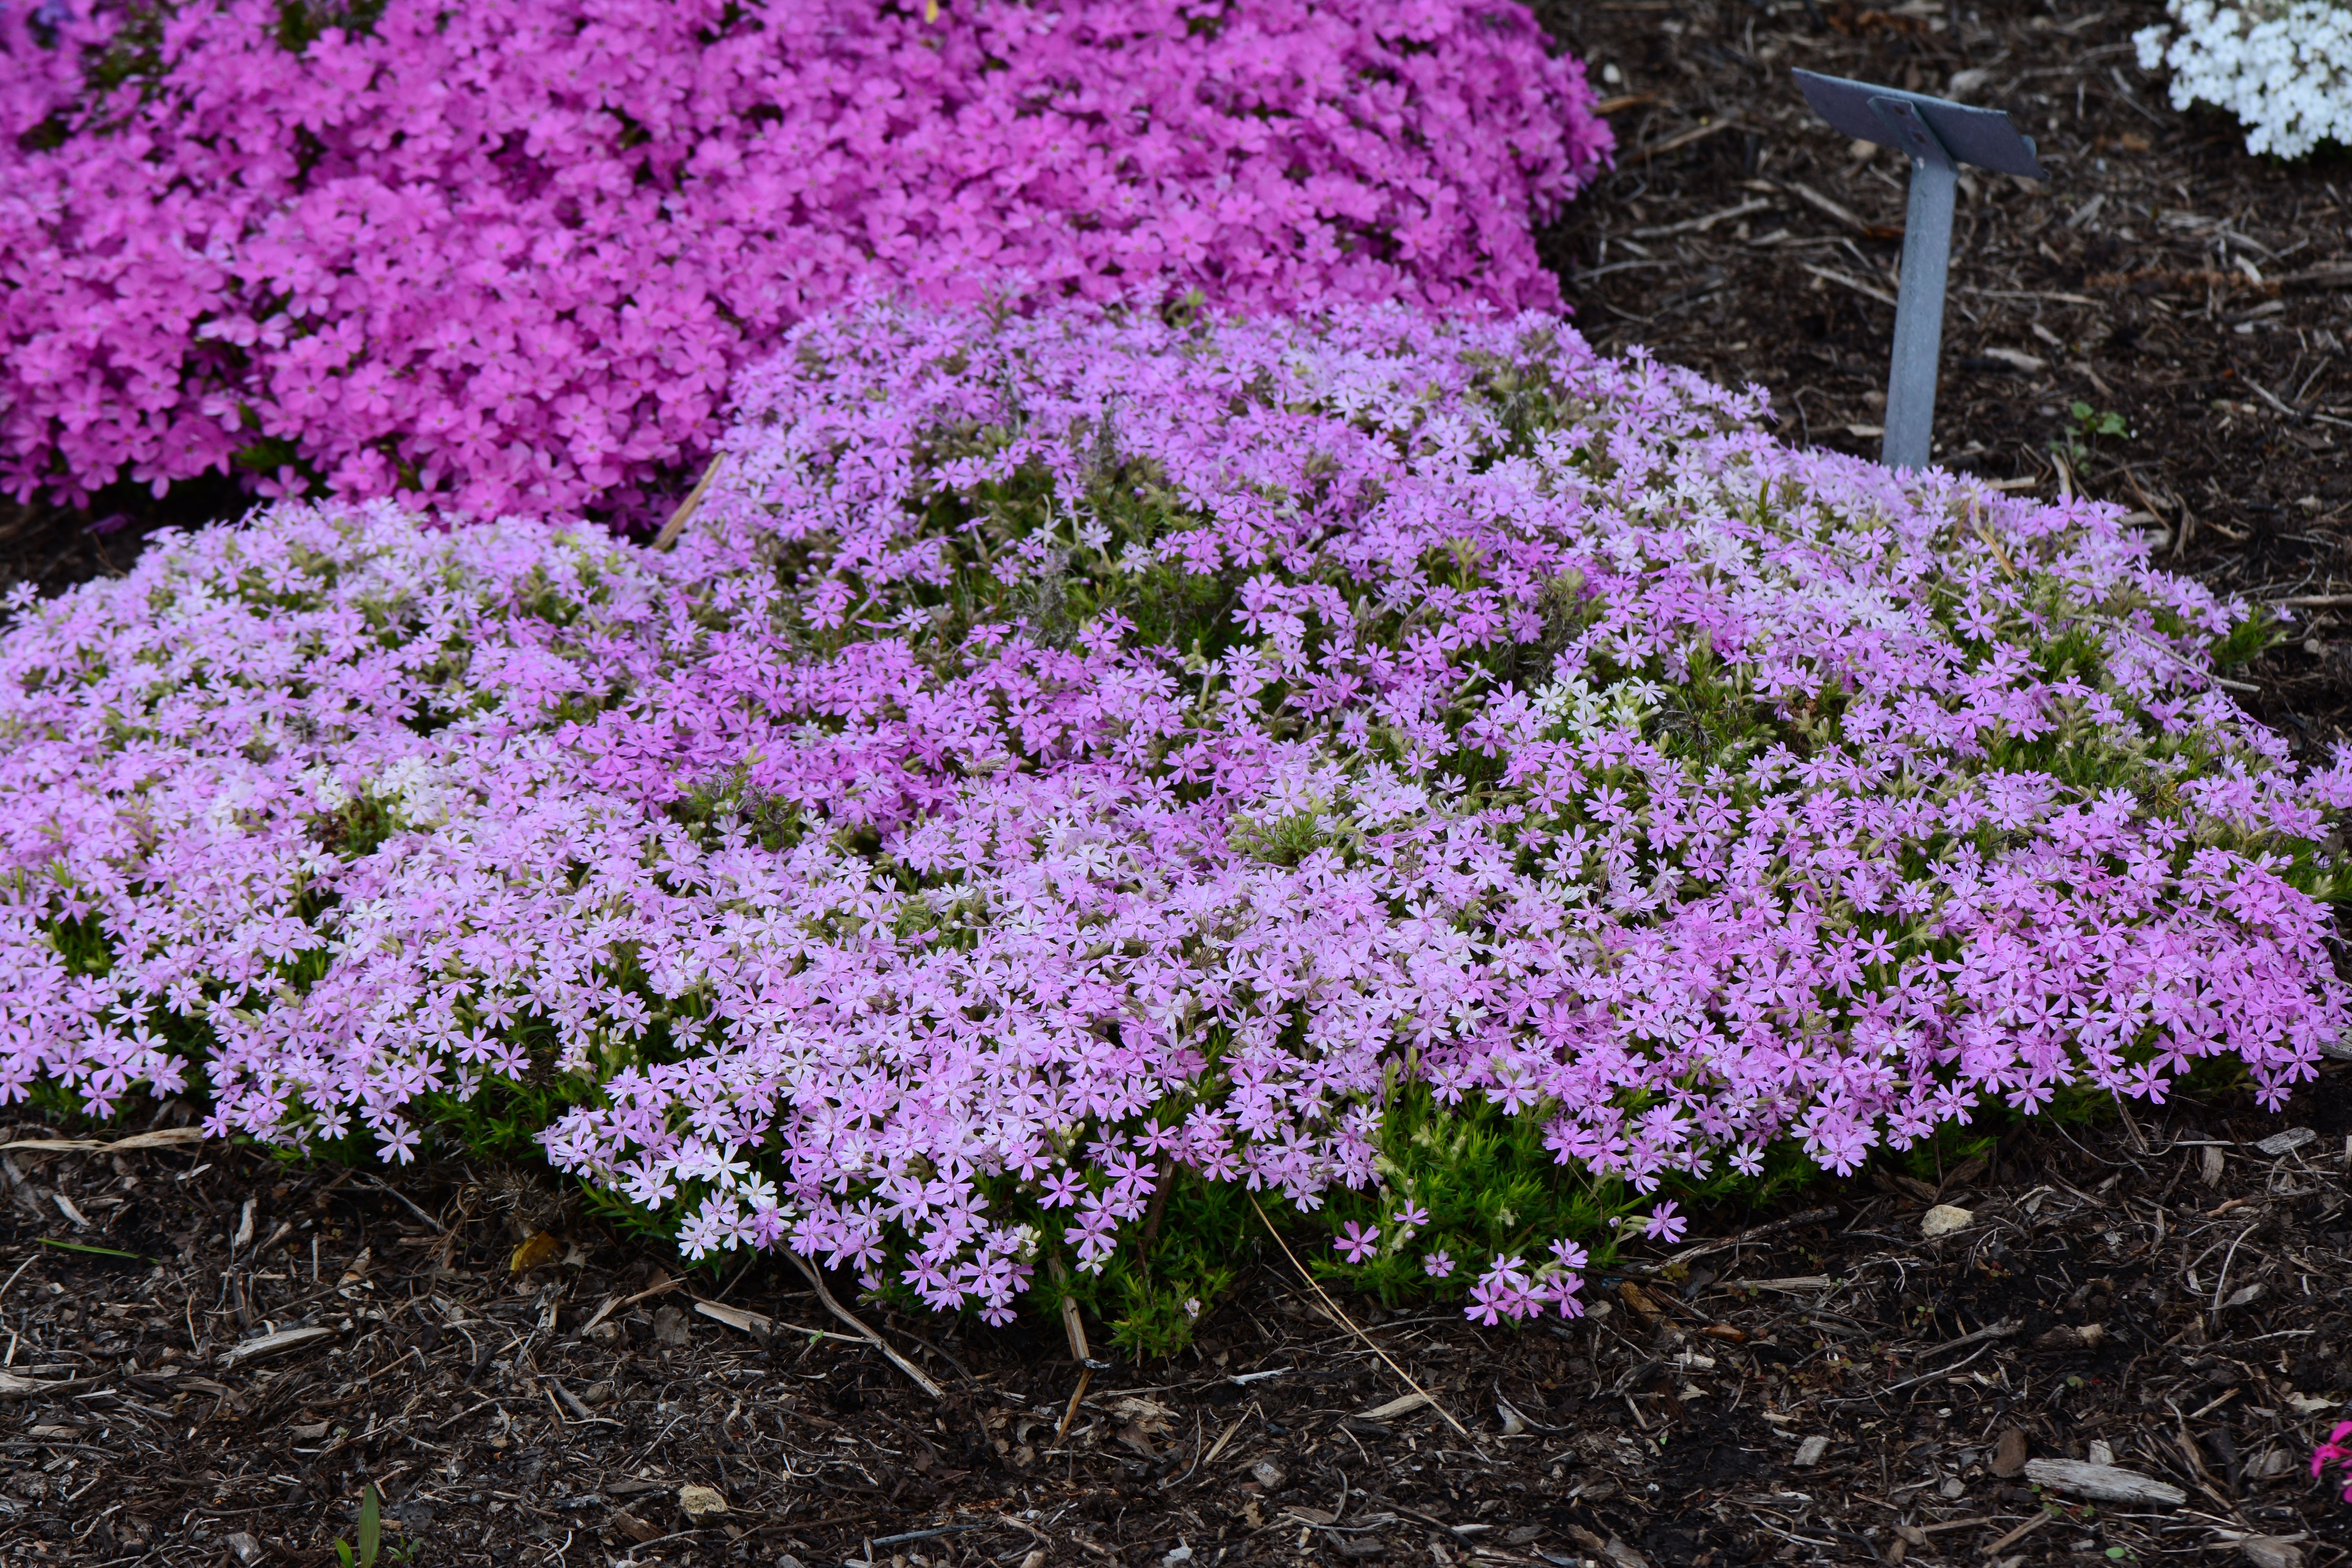 images/plants/phlox/phl-perfectly-puzzling/phl-perfectly-puzzling-0007.jpg